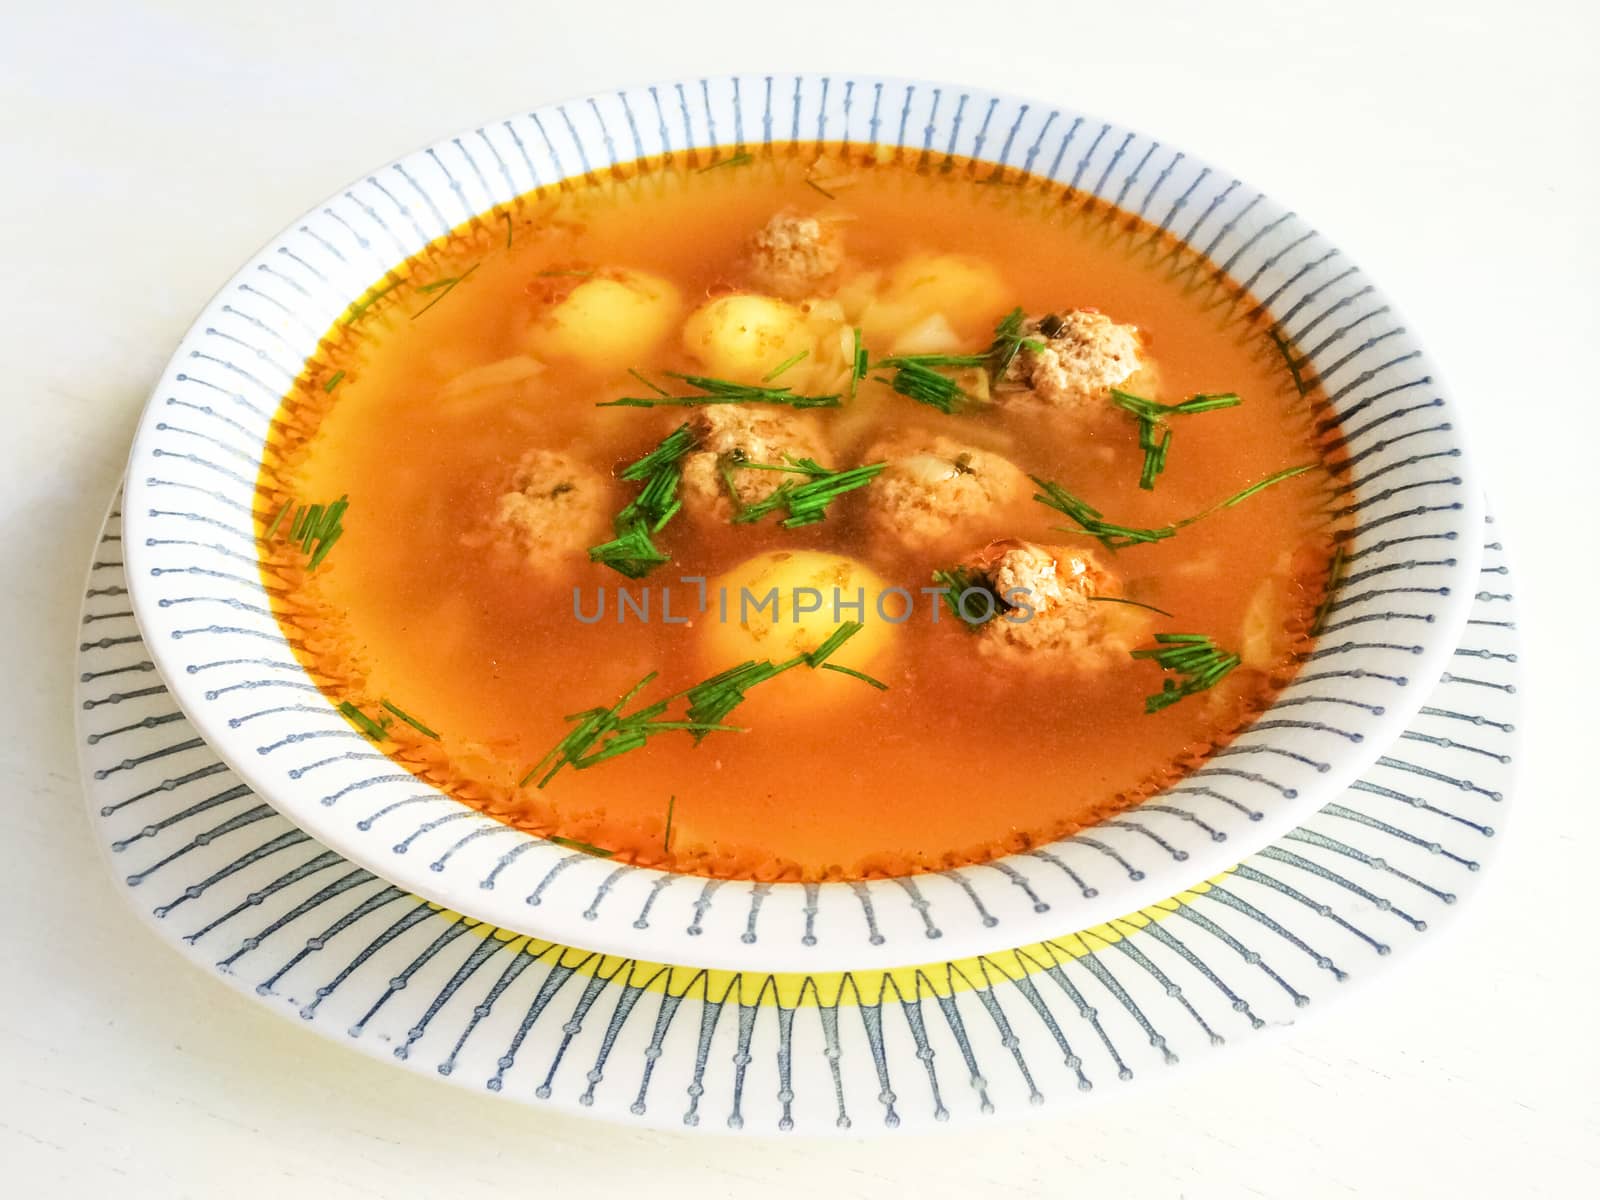 Tasty homemade soup with meatballs and potatoes.